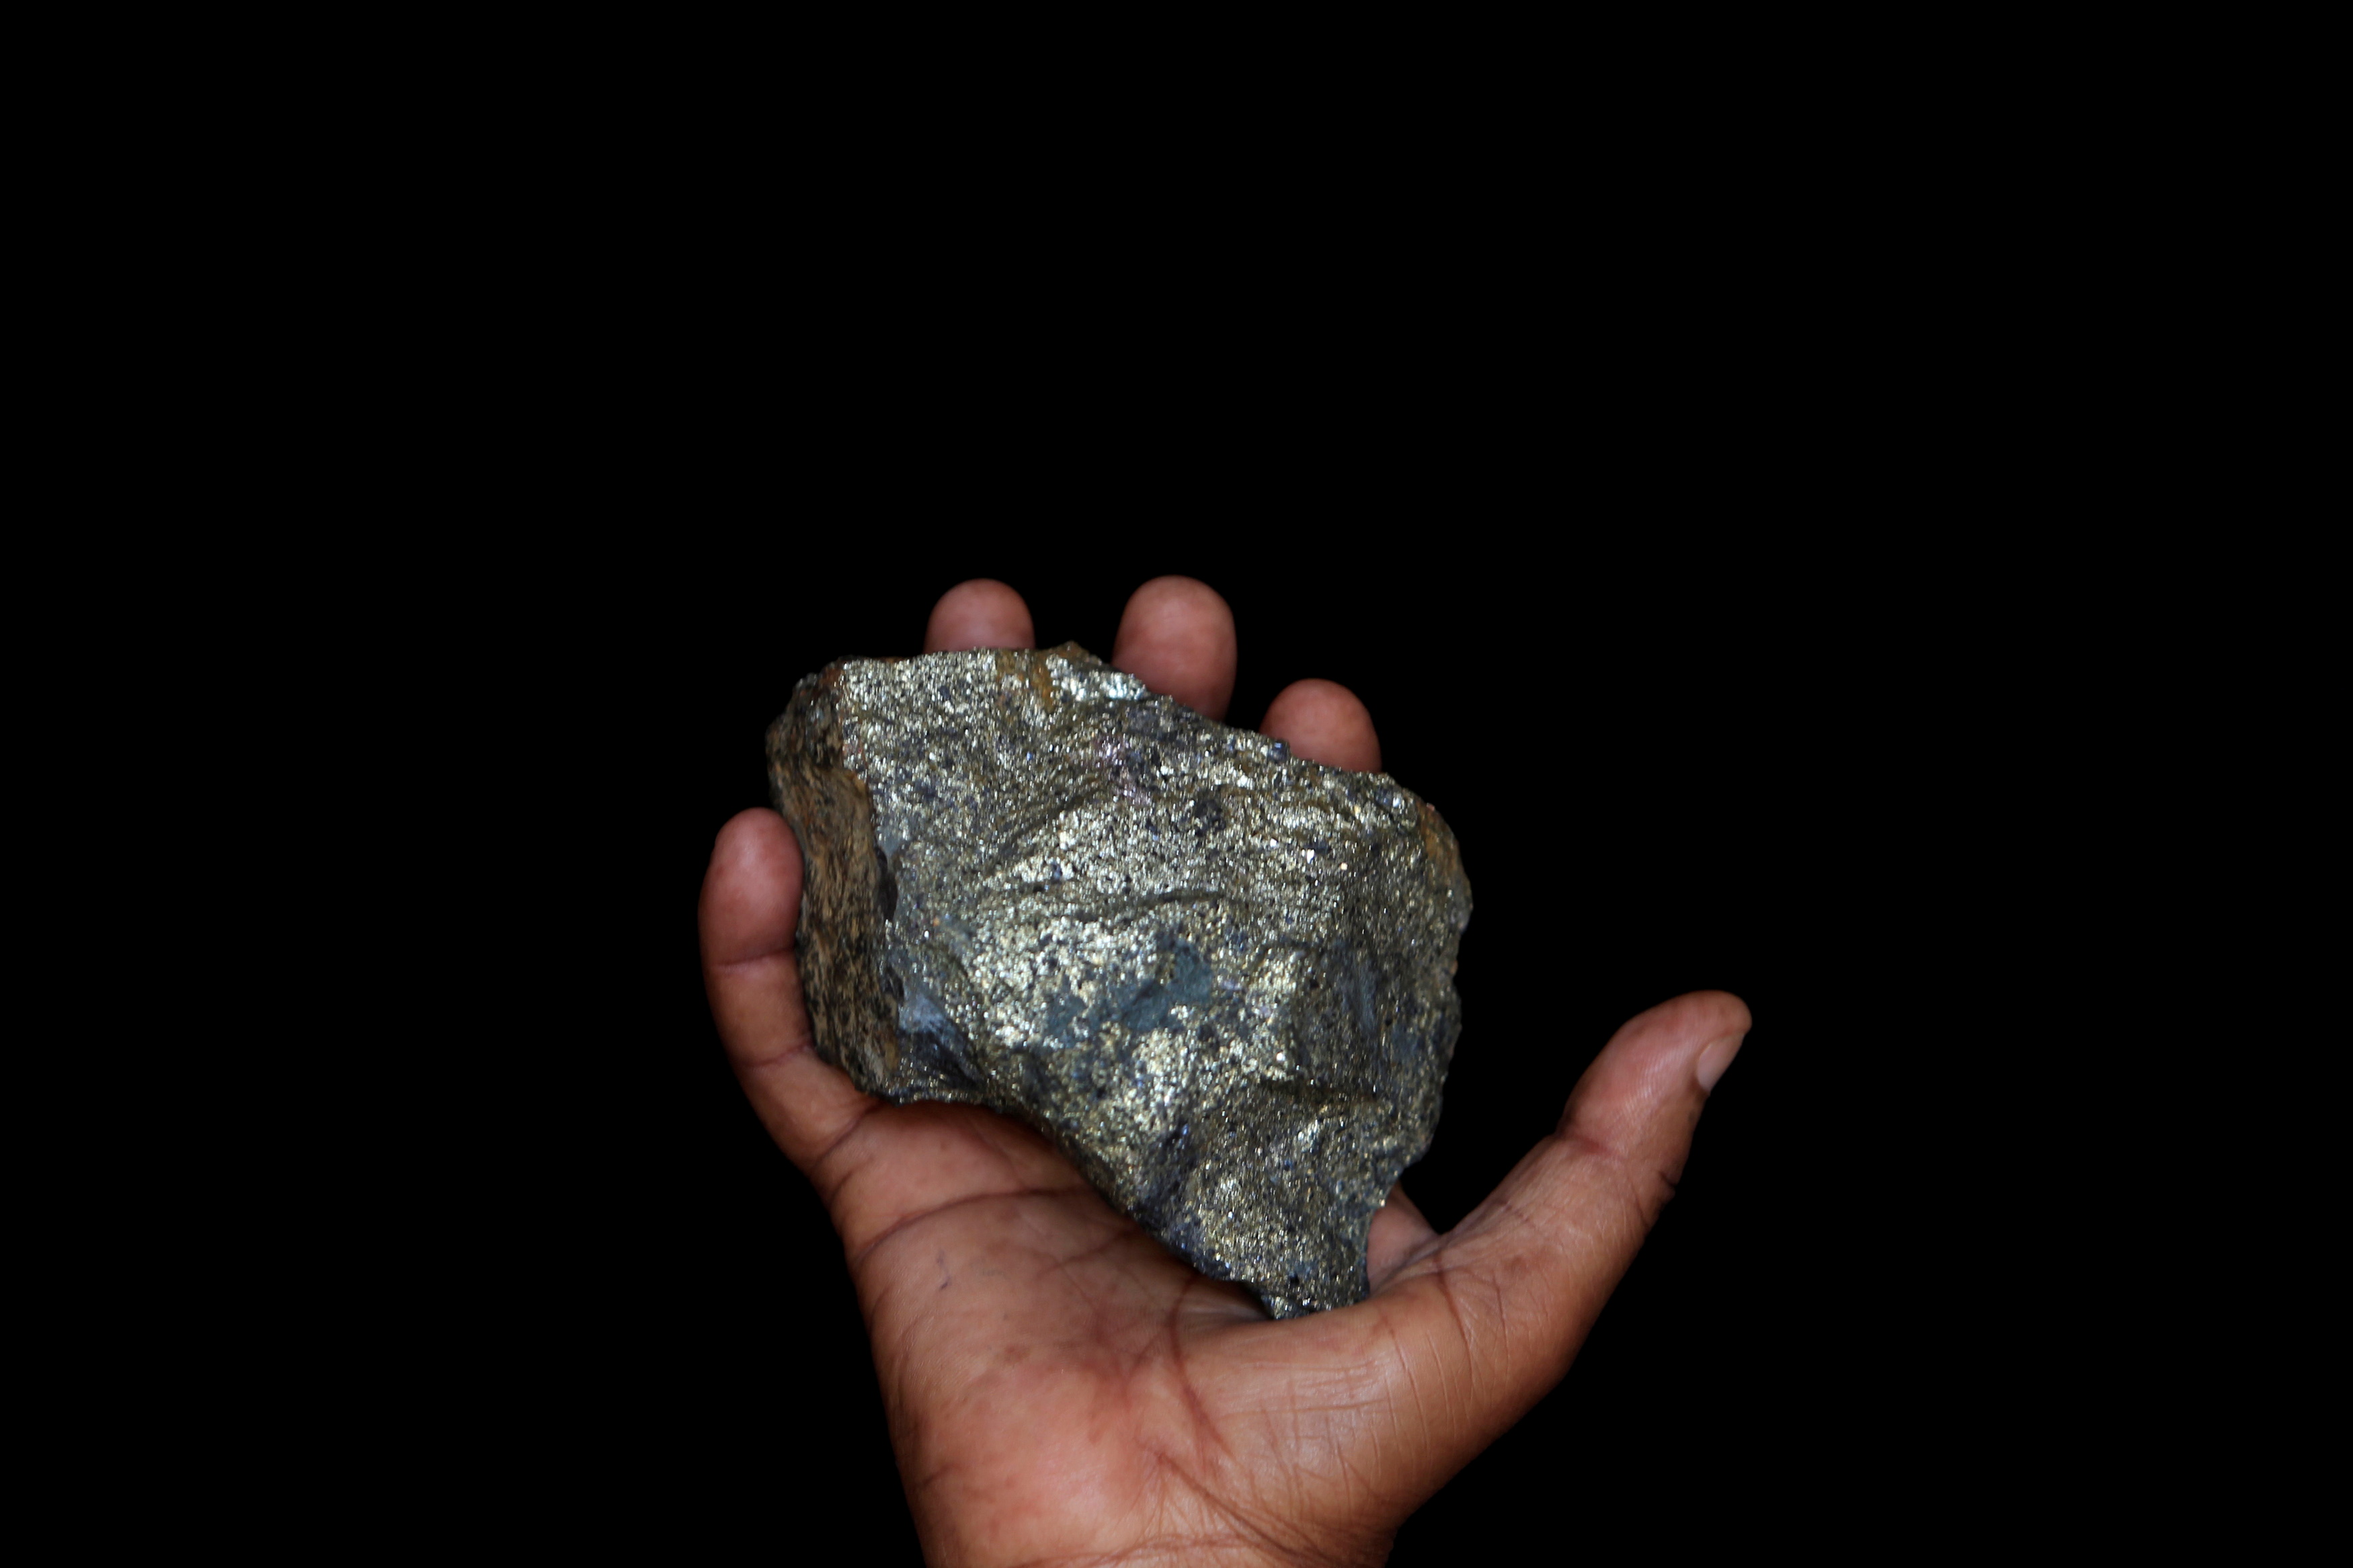 A mine employee shows a piece of copper ore at the Kilembe mines, in the foothills of the Rwenzori Mountains, 497km (309 miles) west of Uganda's capital Kampala, January 31, 2013. 